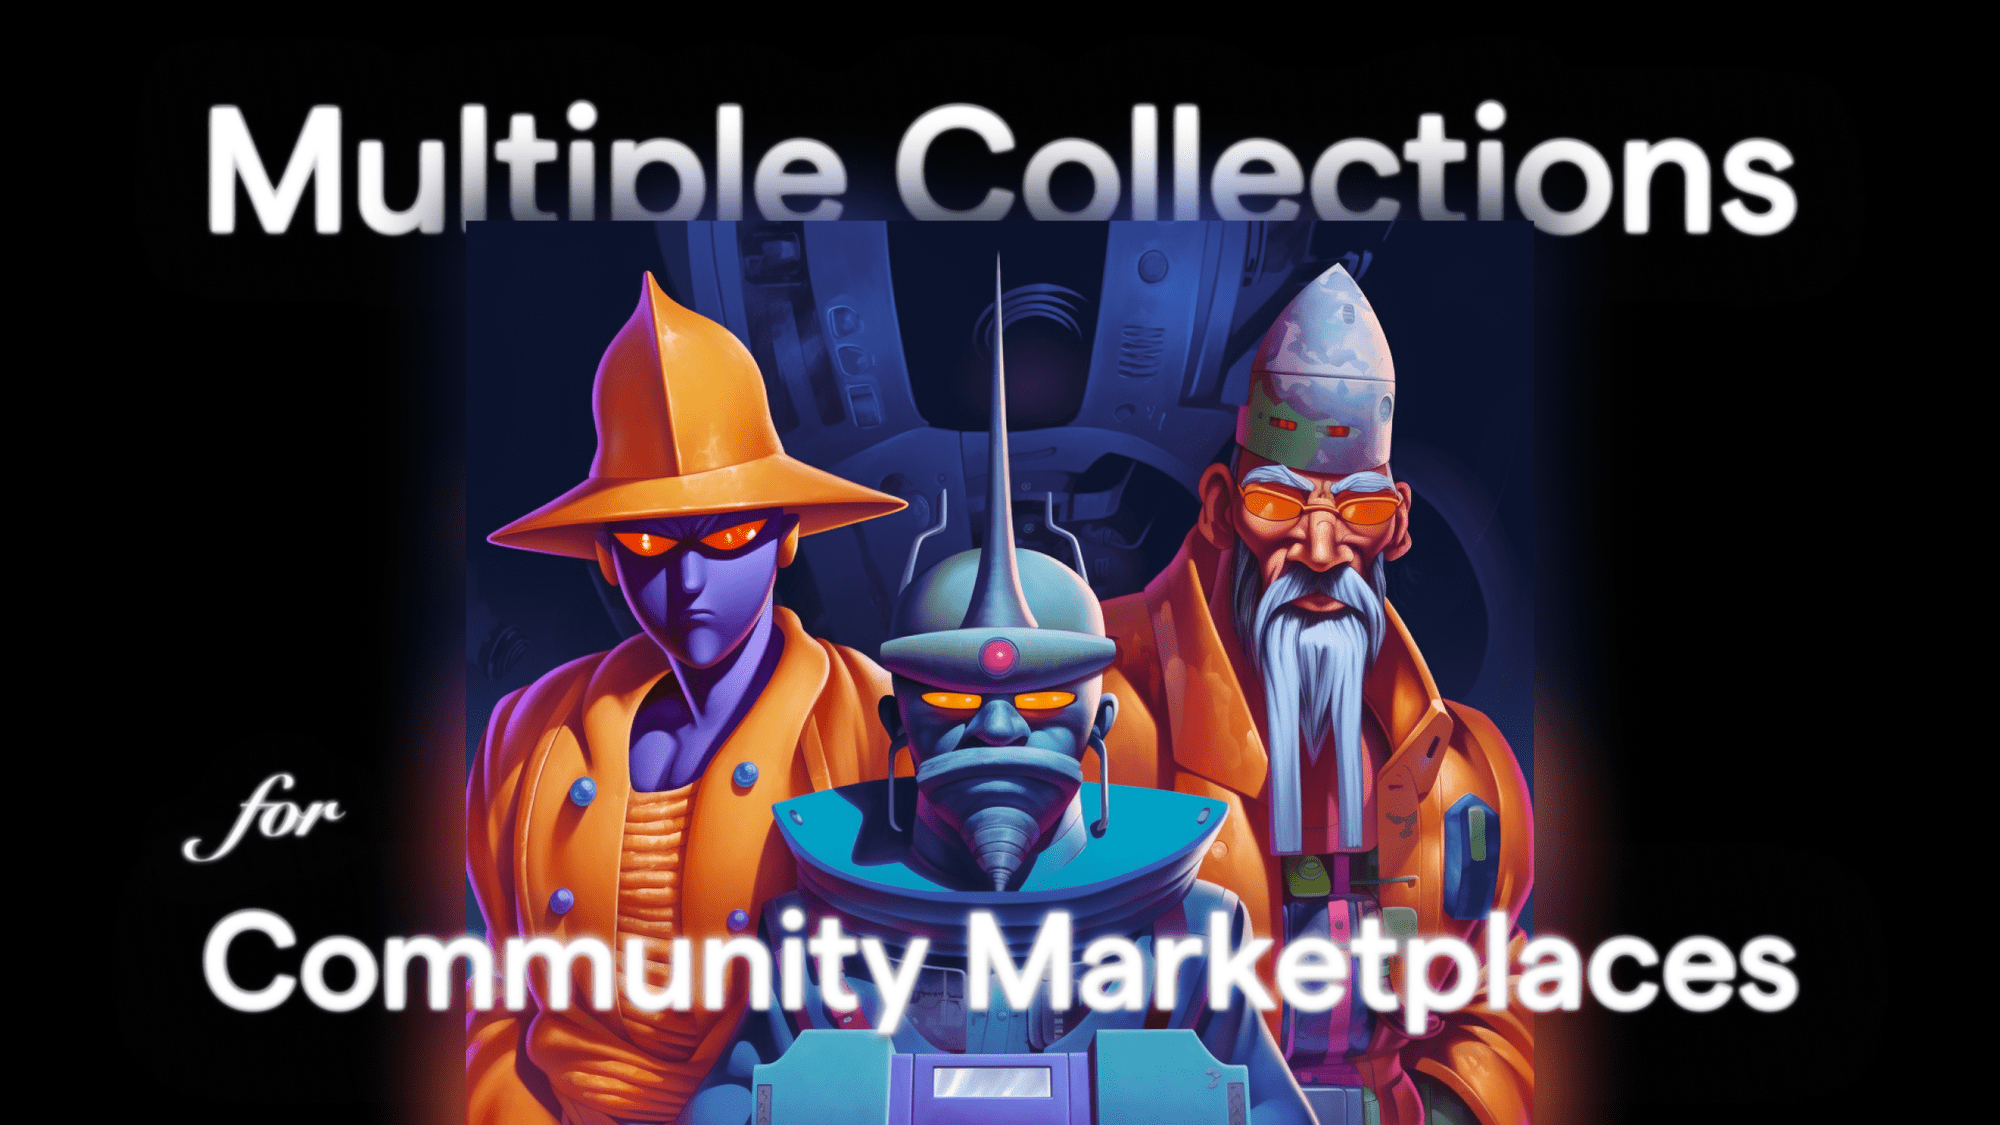 One Community Marketplace. Multiple collections.